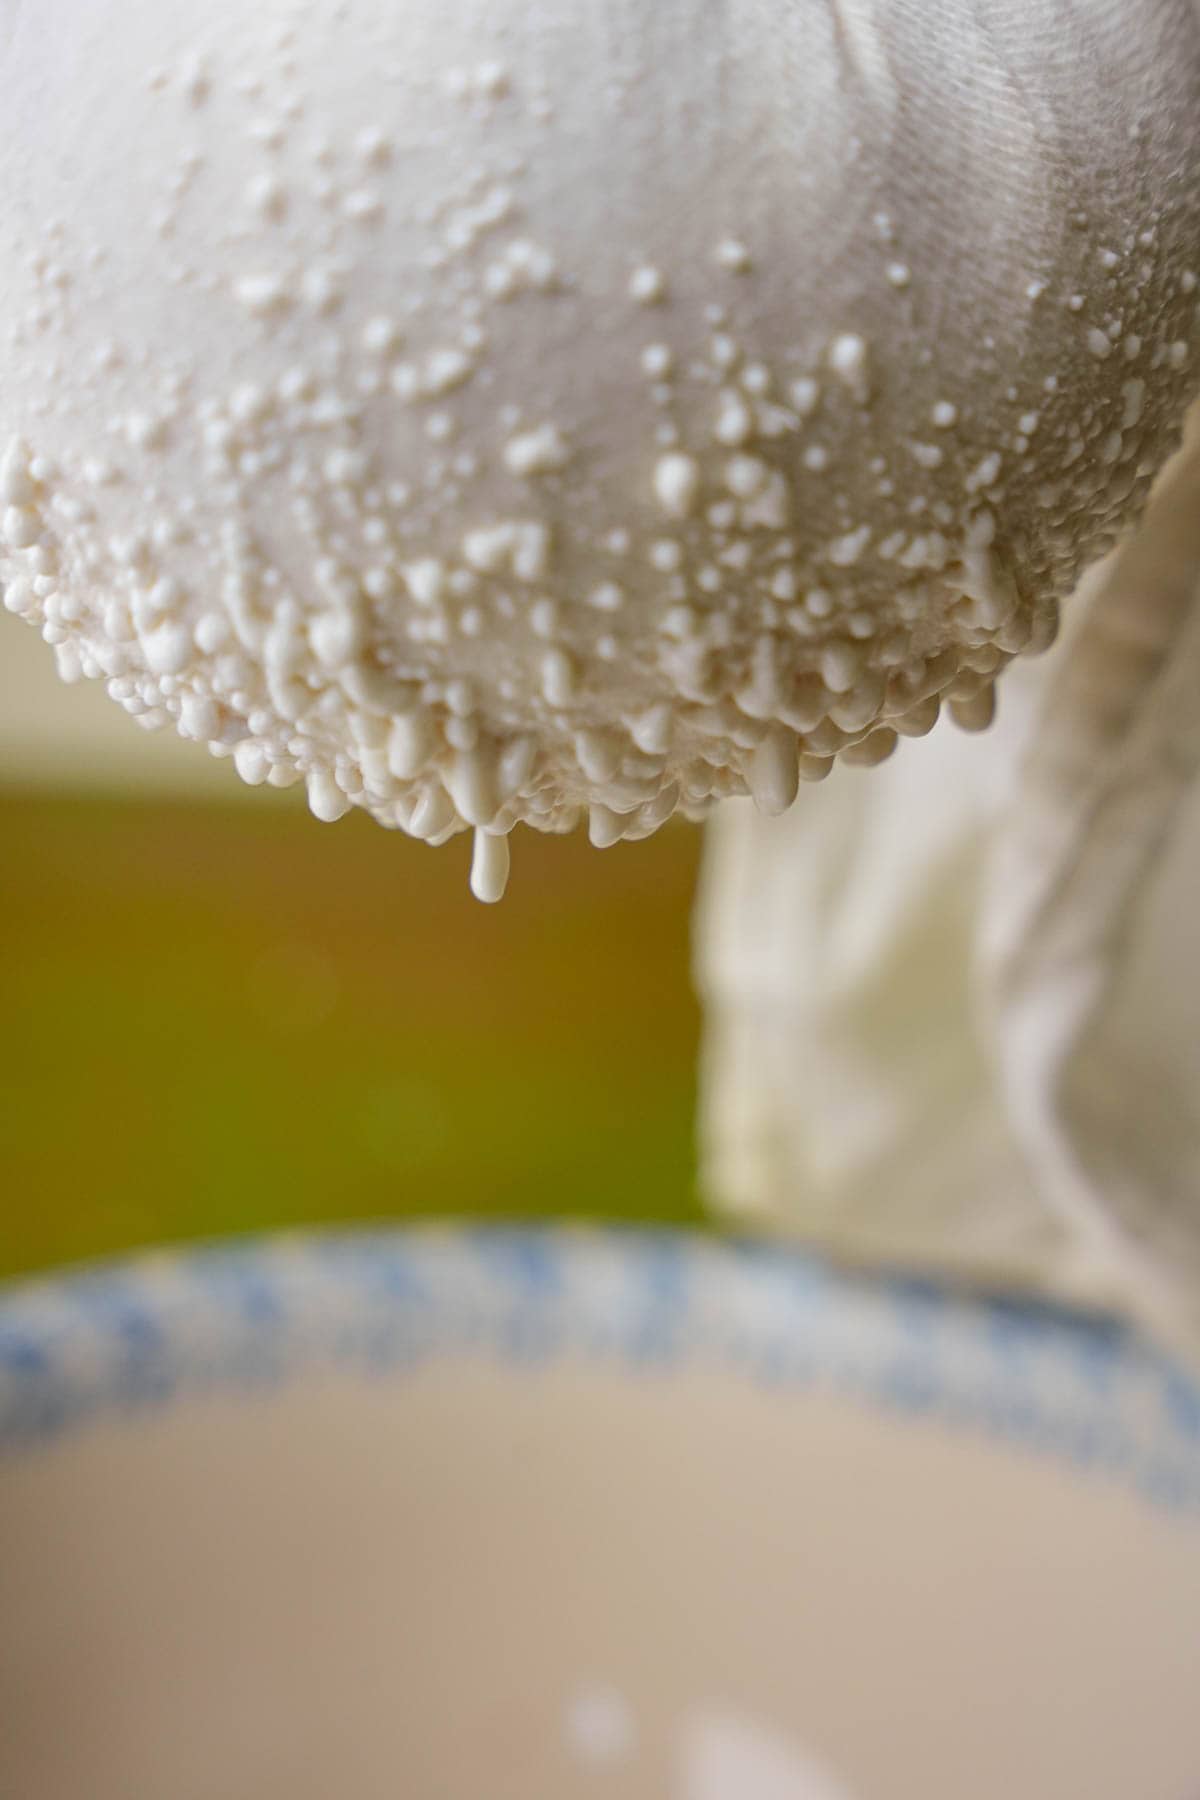 Liquid is shown being strained out of cheesecloth into a ceramic bowl